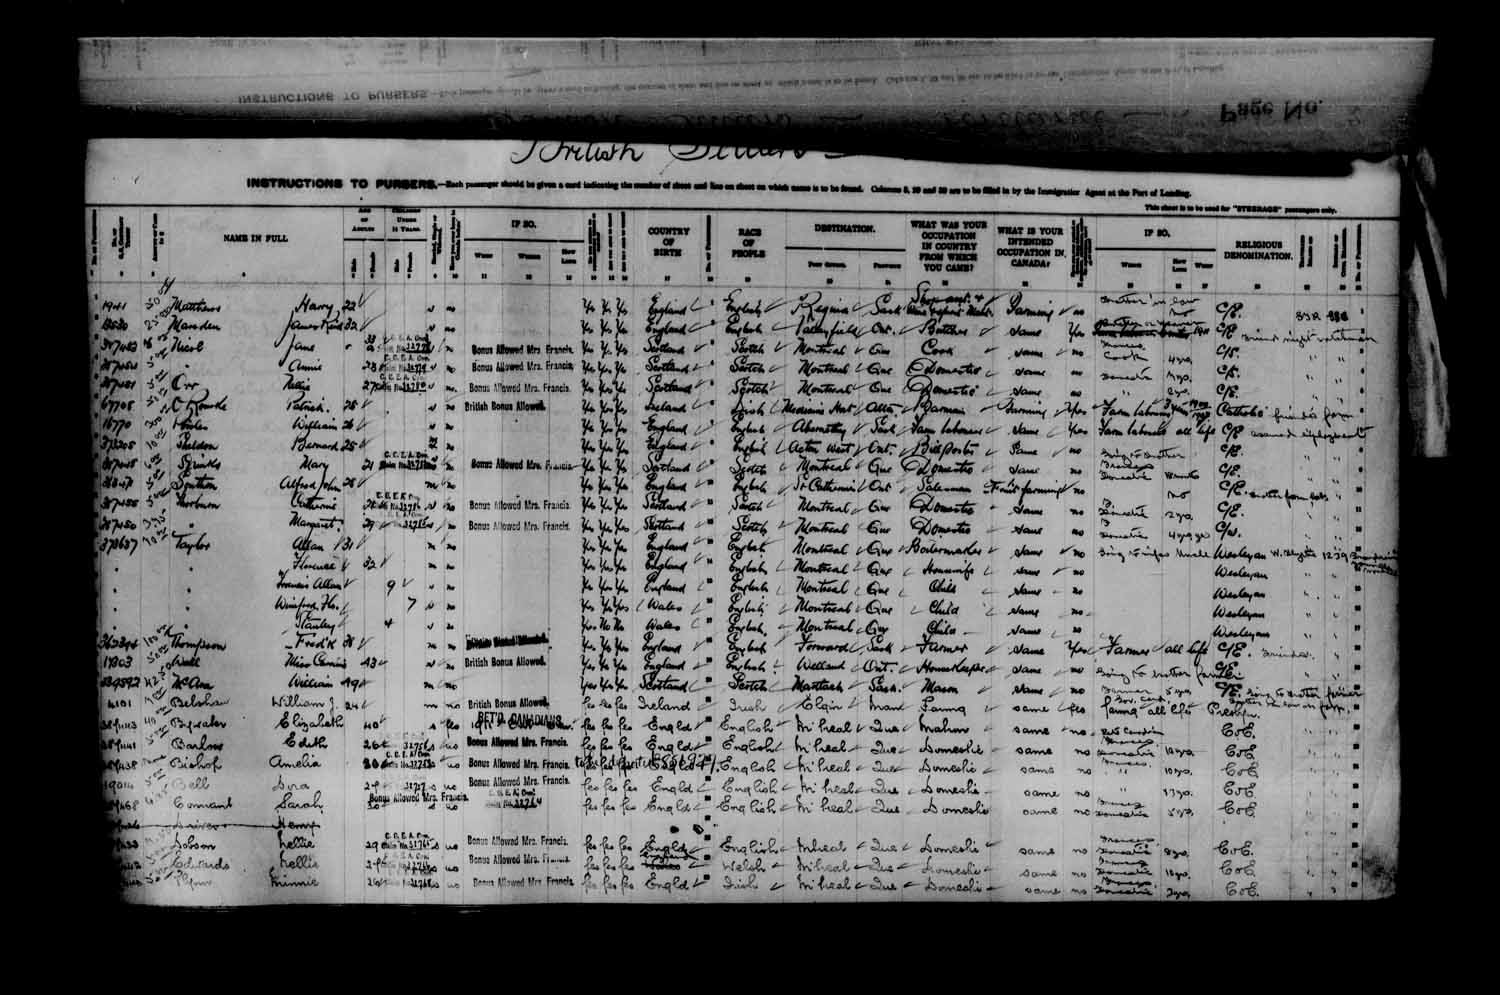 Digitized page of Passenger Lists for Image No.: e003622991